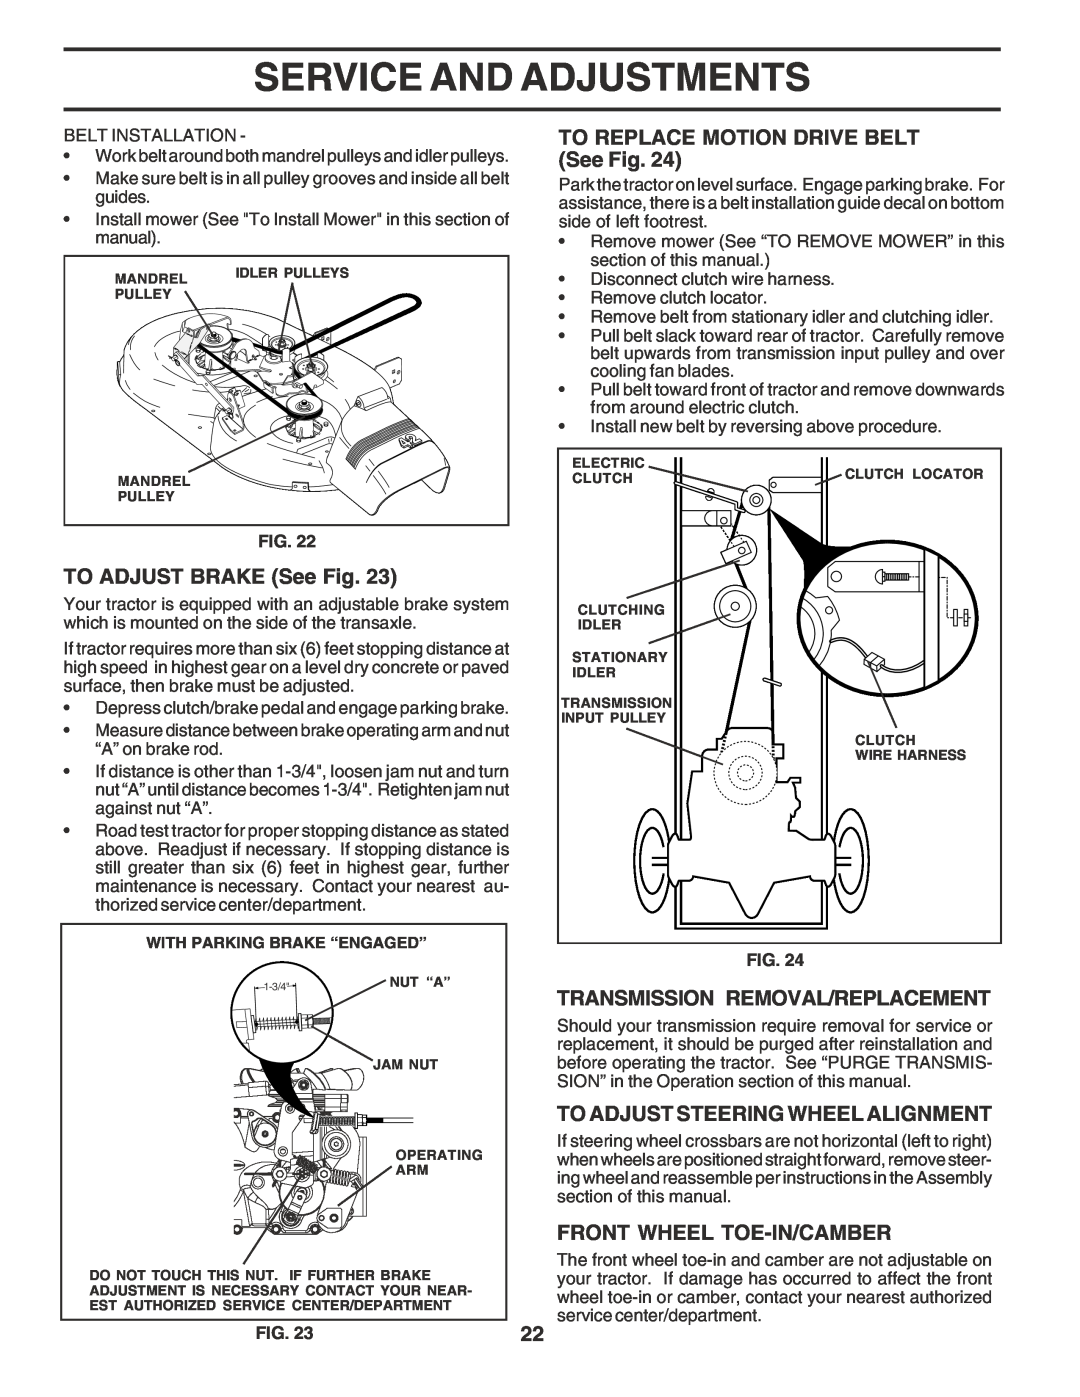 Poulan PR20PH42STB TO ADJUST BRAKE See Fig, TO REPLACE MOTION DRIVE BELT See Fig, Transmission Removal/Replacement 